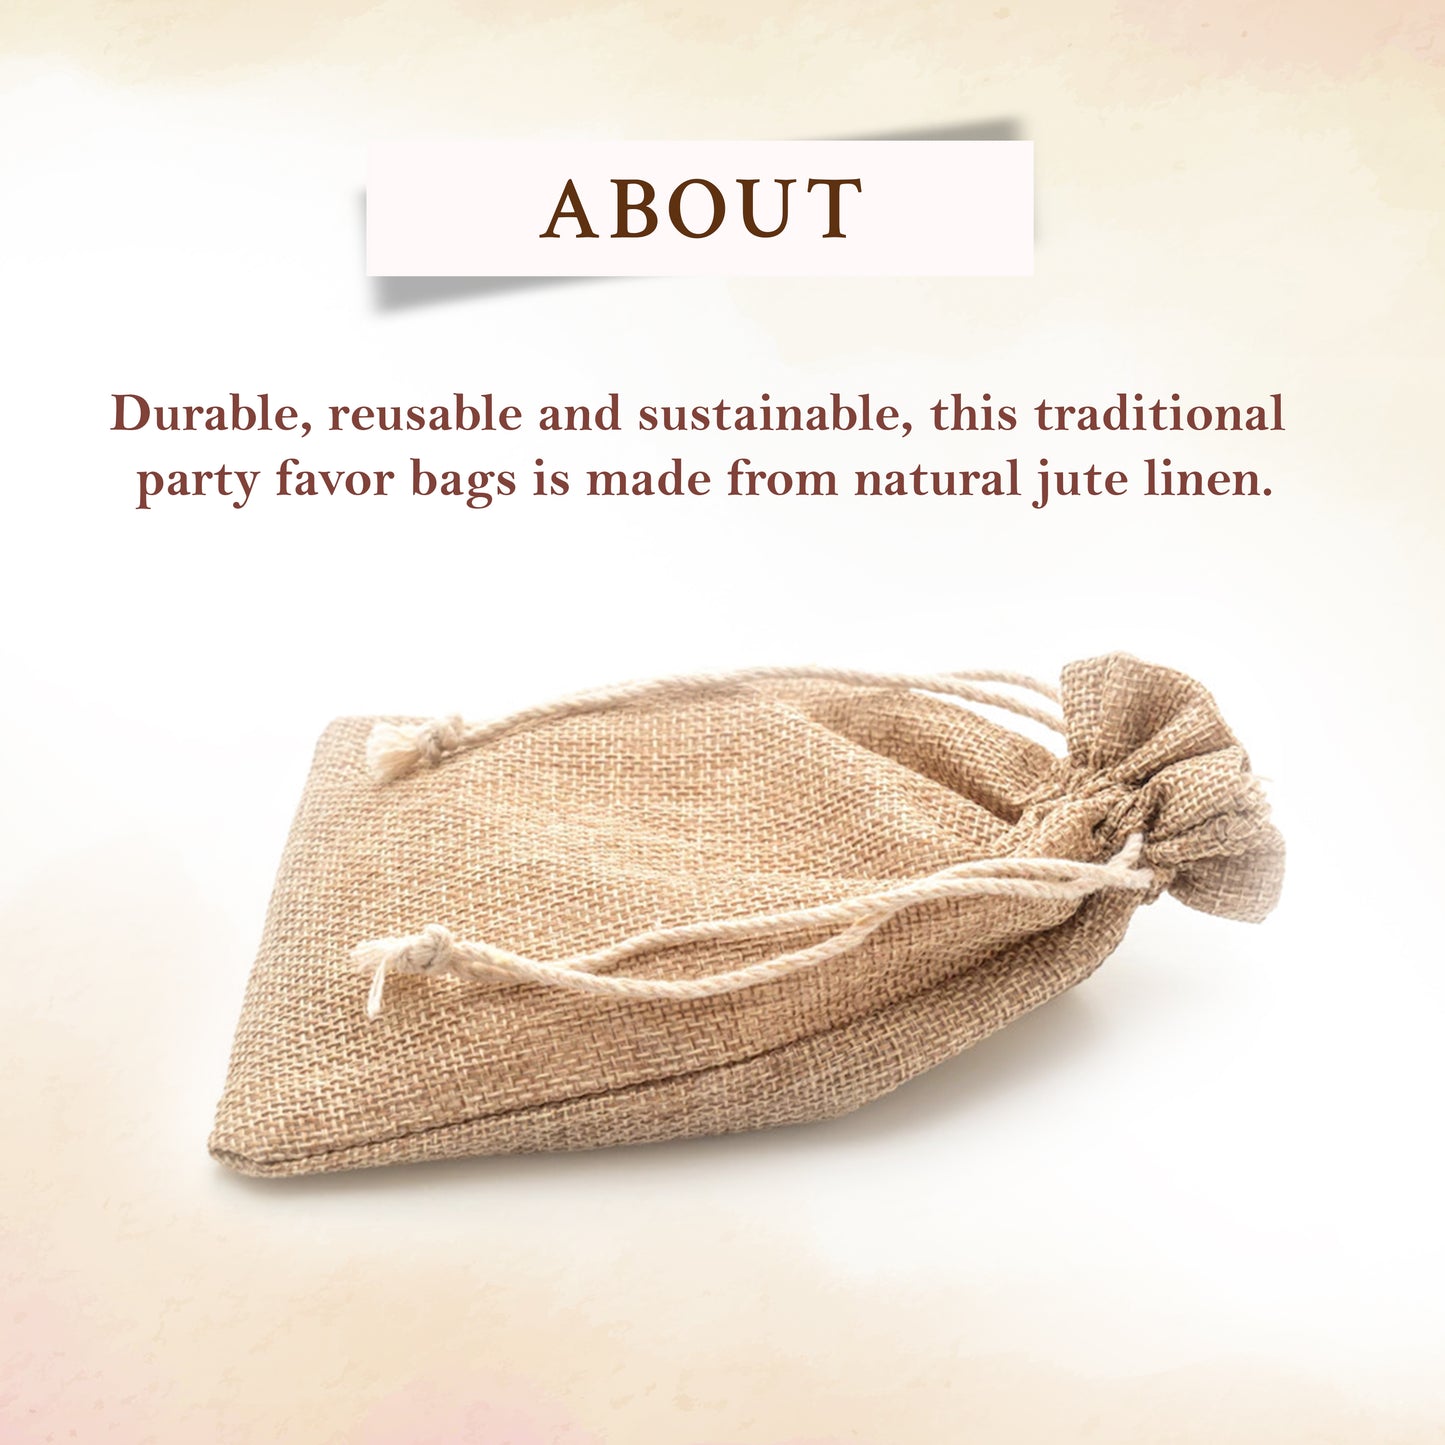 100% Natural Jute pouch 9x6inch |Jute potli bag pouch for gift | Handmade & Natural | Pack of 10